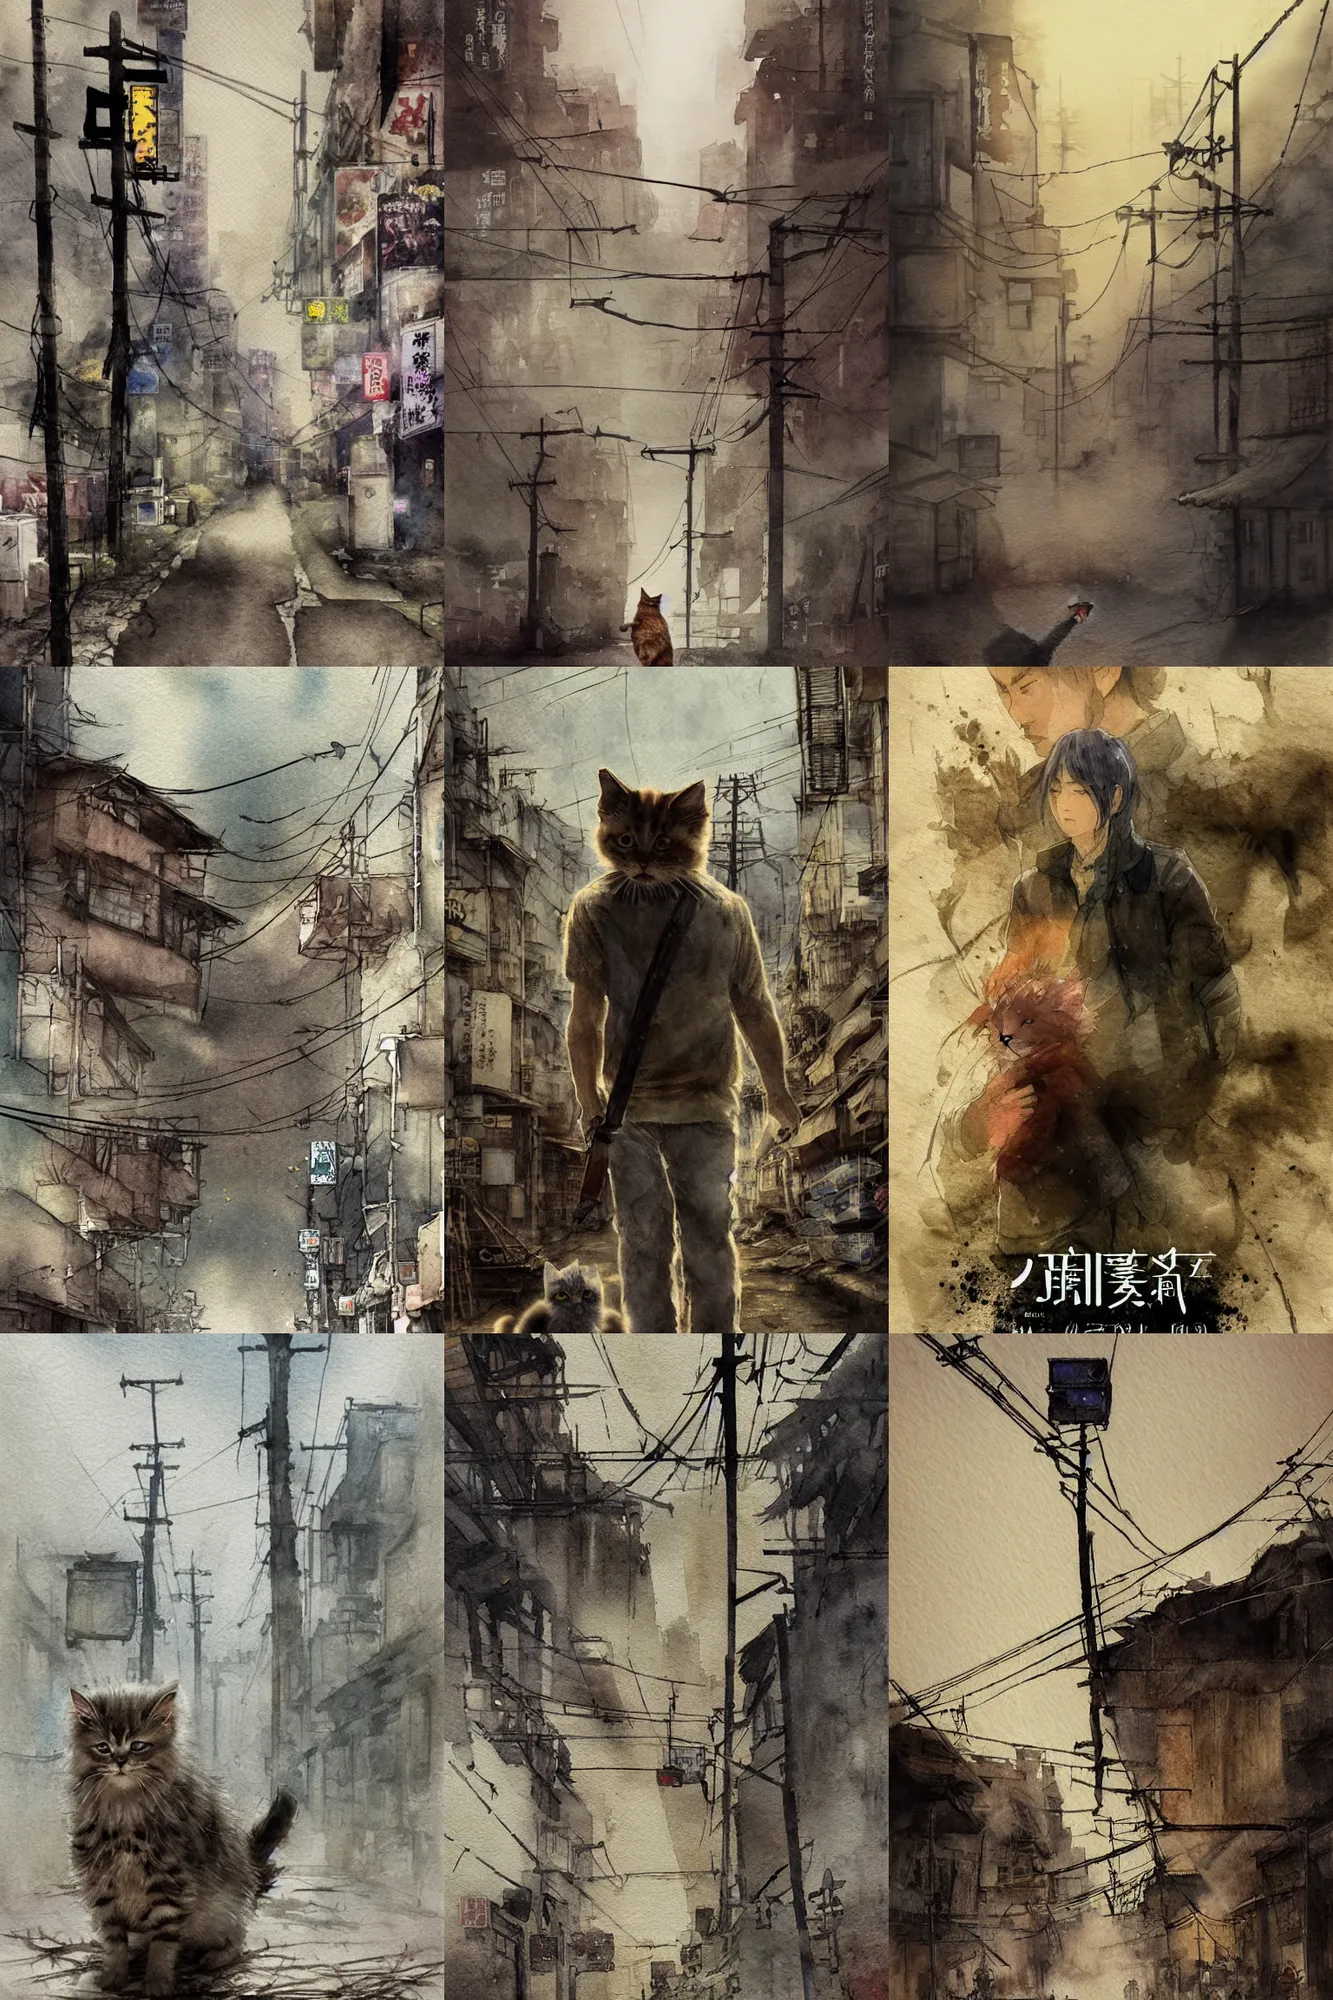 Prompt: incredible miyazaki, ruan jia movie poster, simple watercolor, back lit, paper texture, movie scene, distant shot of lost fluffy kitten in a deserted dusty shinjuku junk town, old pawn shop, bright sun bleached ground , spot light, pale beige sky, junk tv, texture, brown mud, dust, overhead wires, telephone pole, dusty, dry, pencil marks, hd, 4k, remaster, dynamic camera angle, deep 3 point perspective, fish eye, dynamic scene